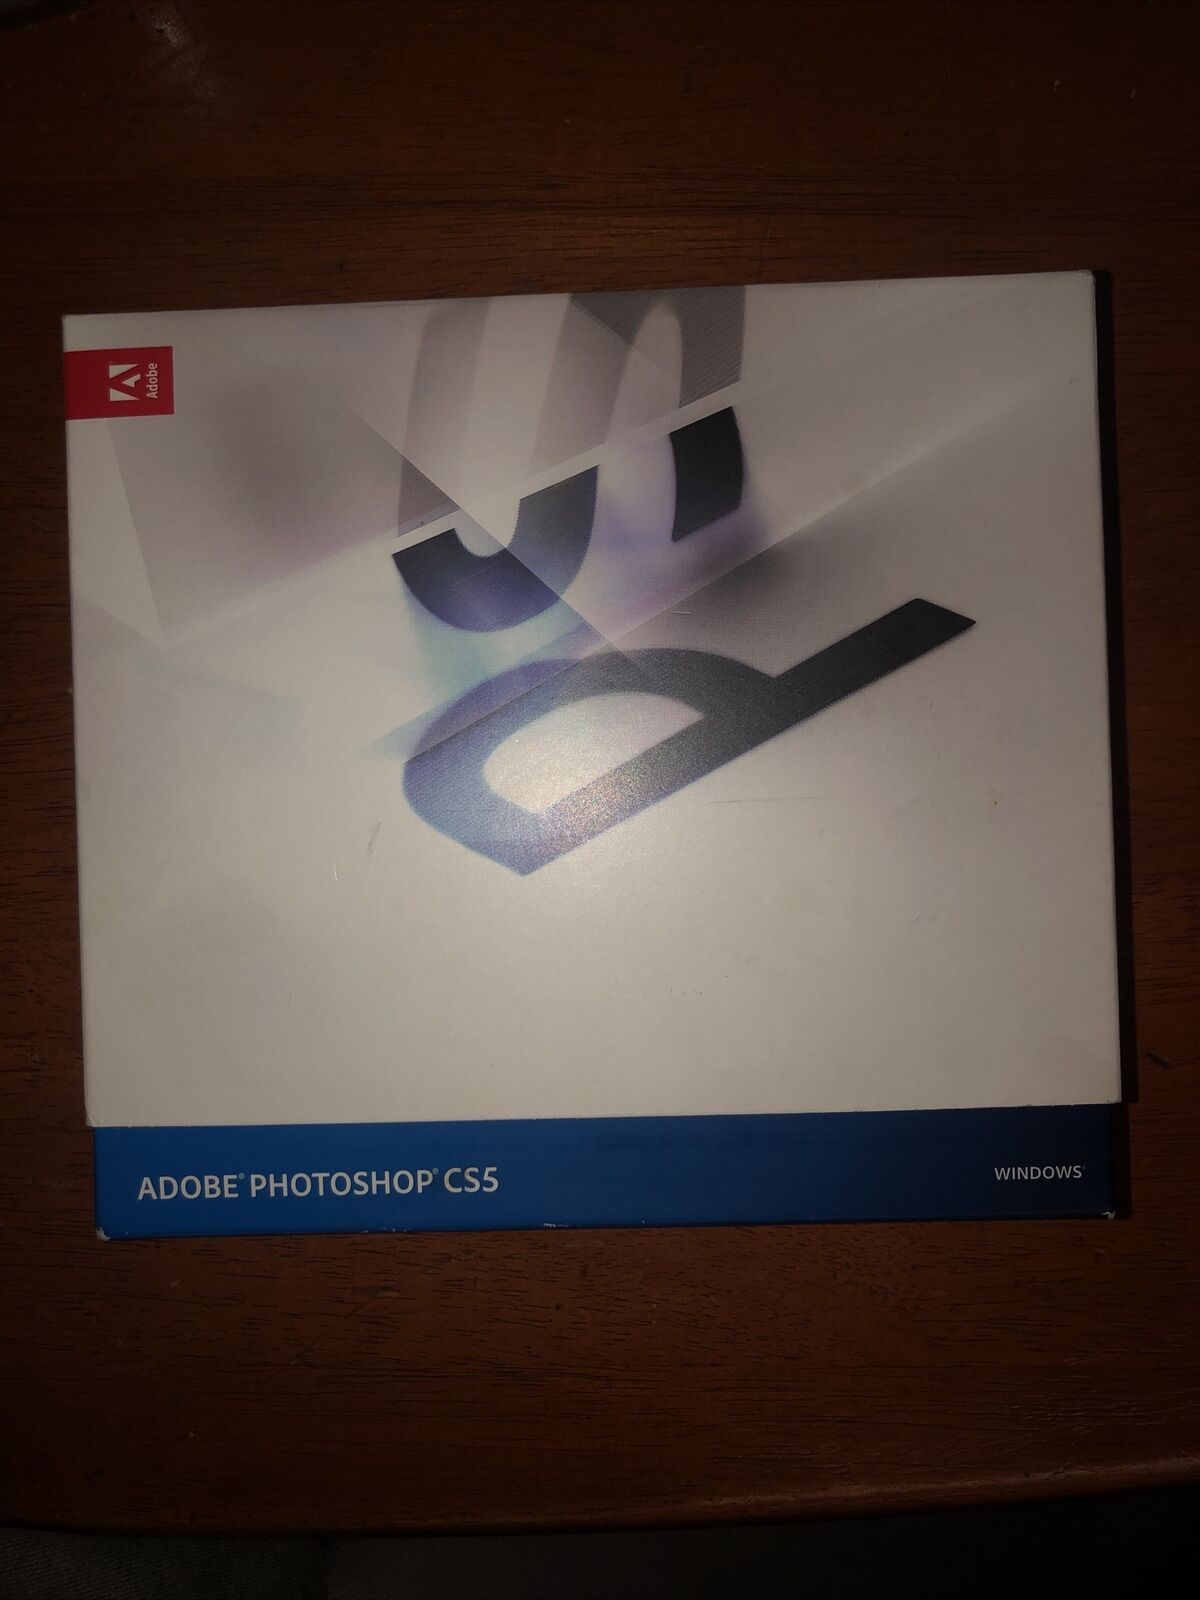 Adobe Photoshop CS5 for Windows Ful Version with Serial Number Preowned